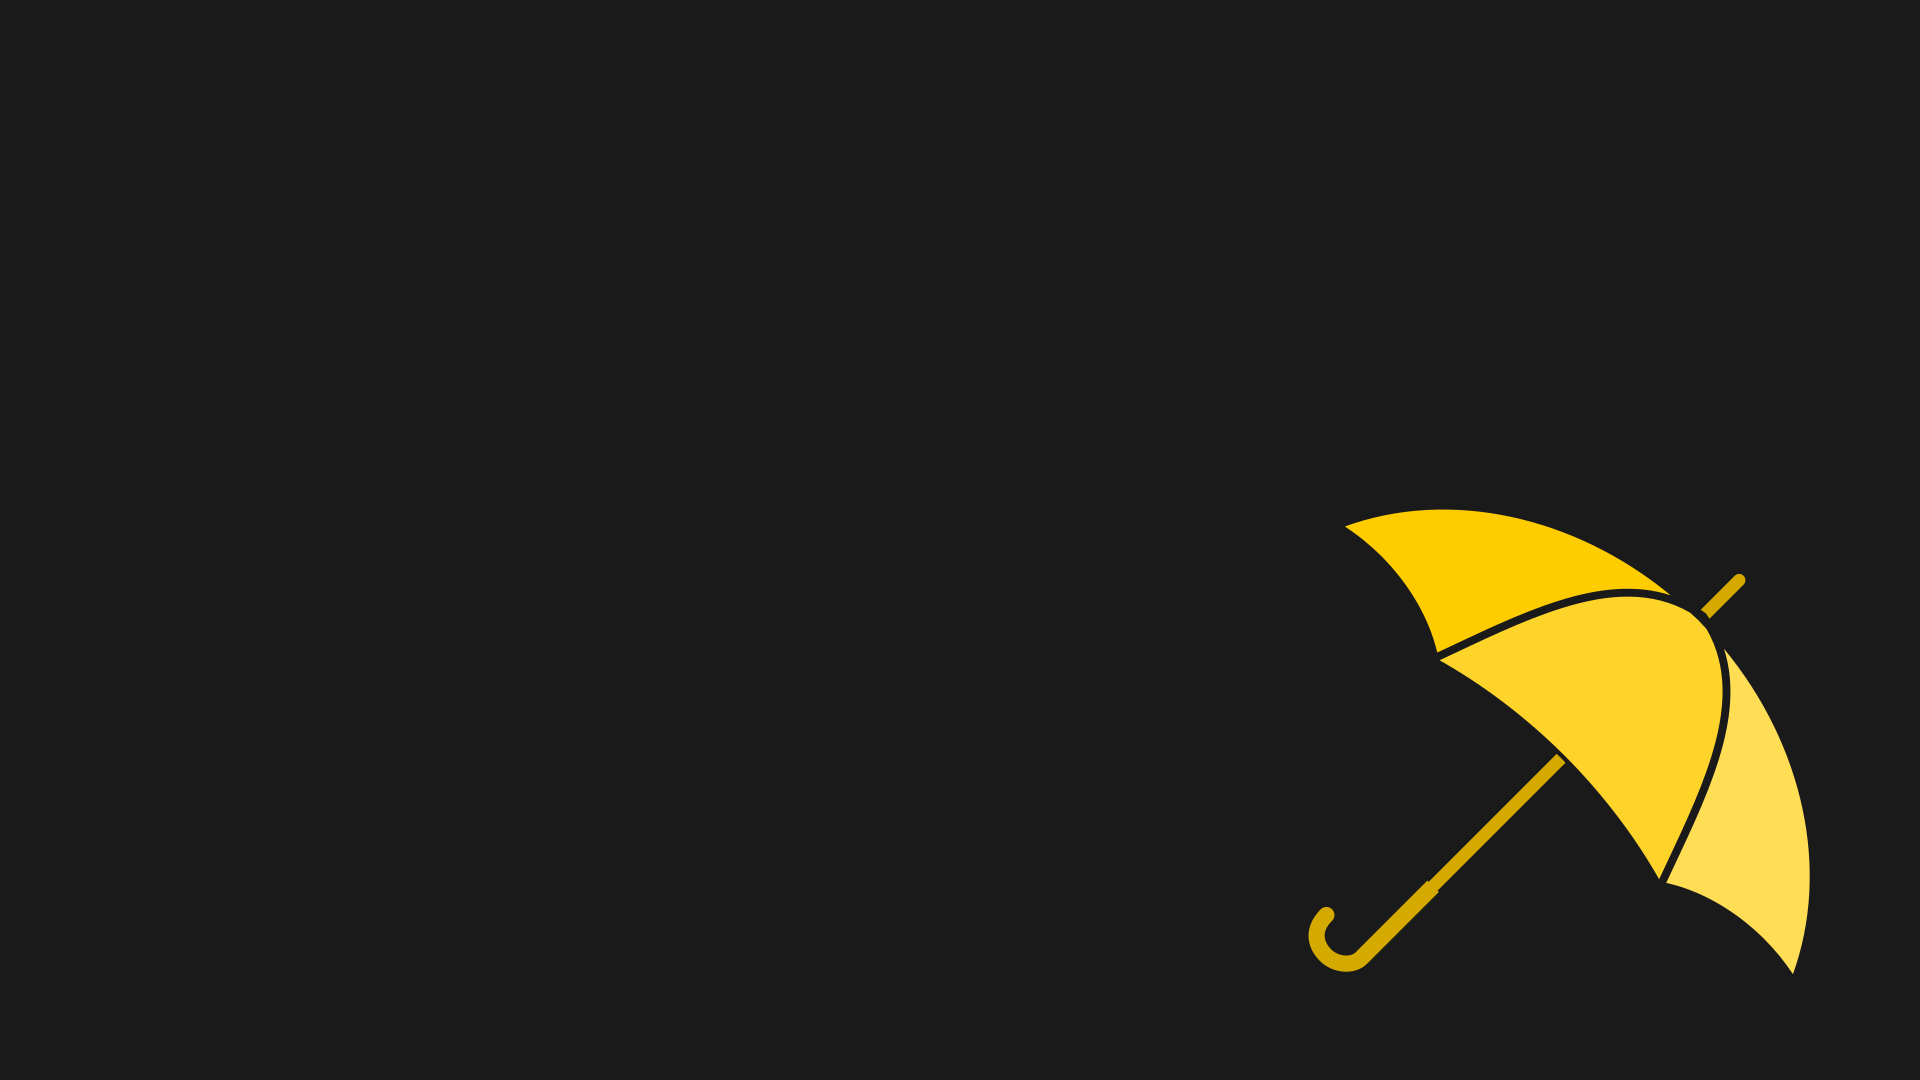 How I Met Your Mother Umbrella Yellow Umbrella Ted Mosby Barney Stinson 1920x1080